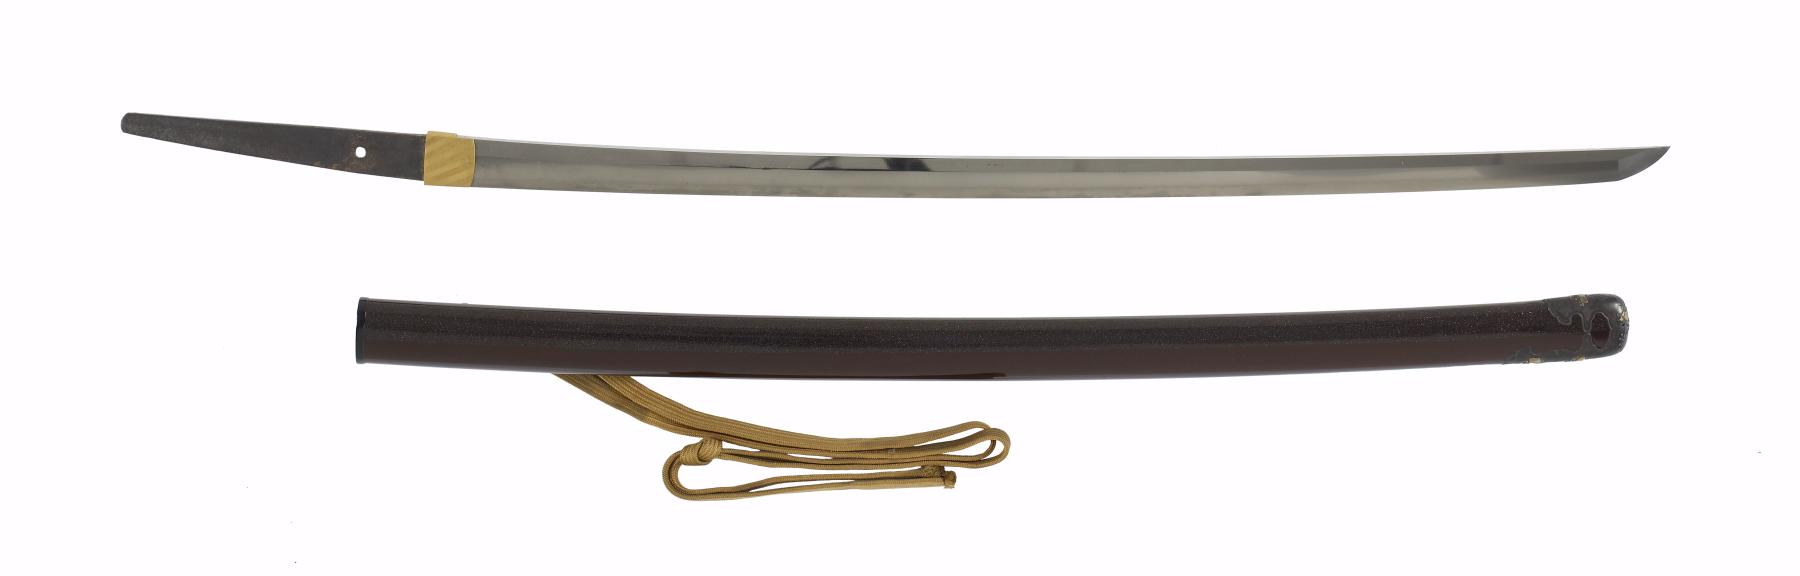 Image for Katana sword with saya of red-brown lacquer and mother-of-pearl- inlay (includes 51.1209.1-51.1209.4)